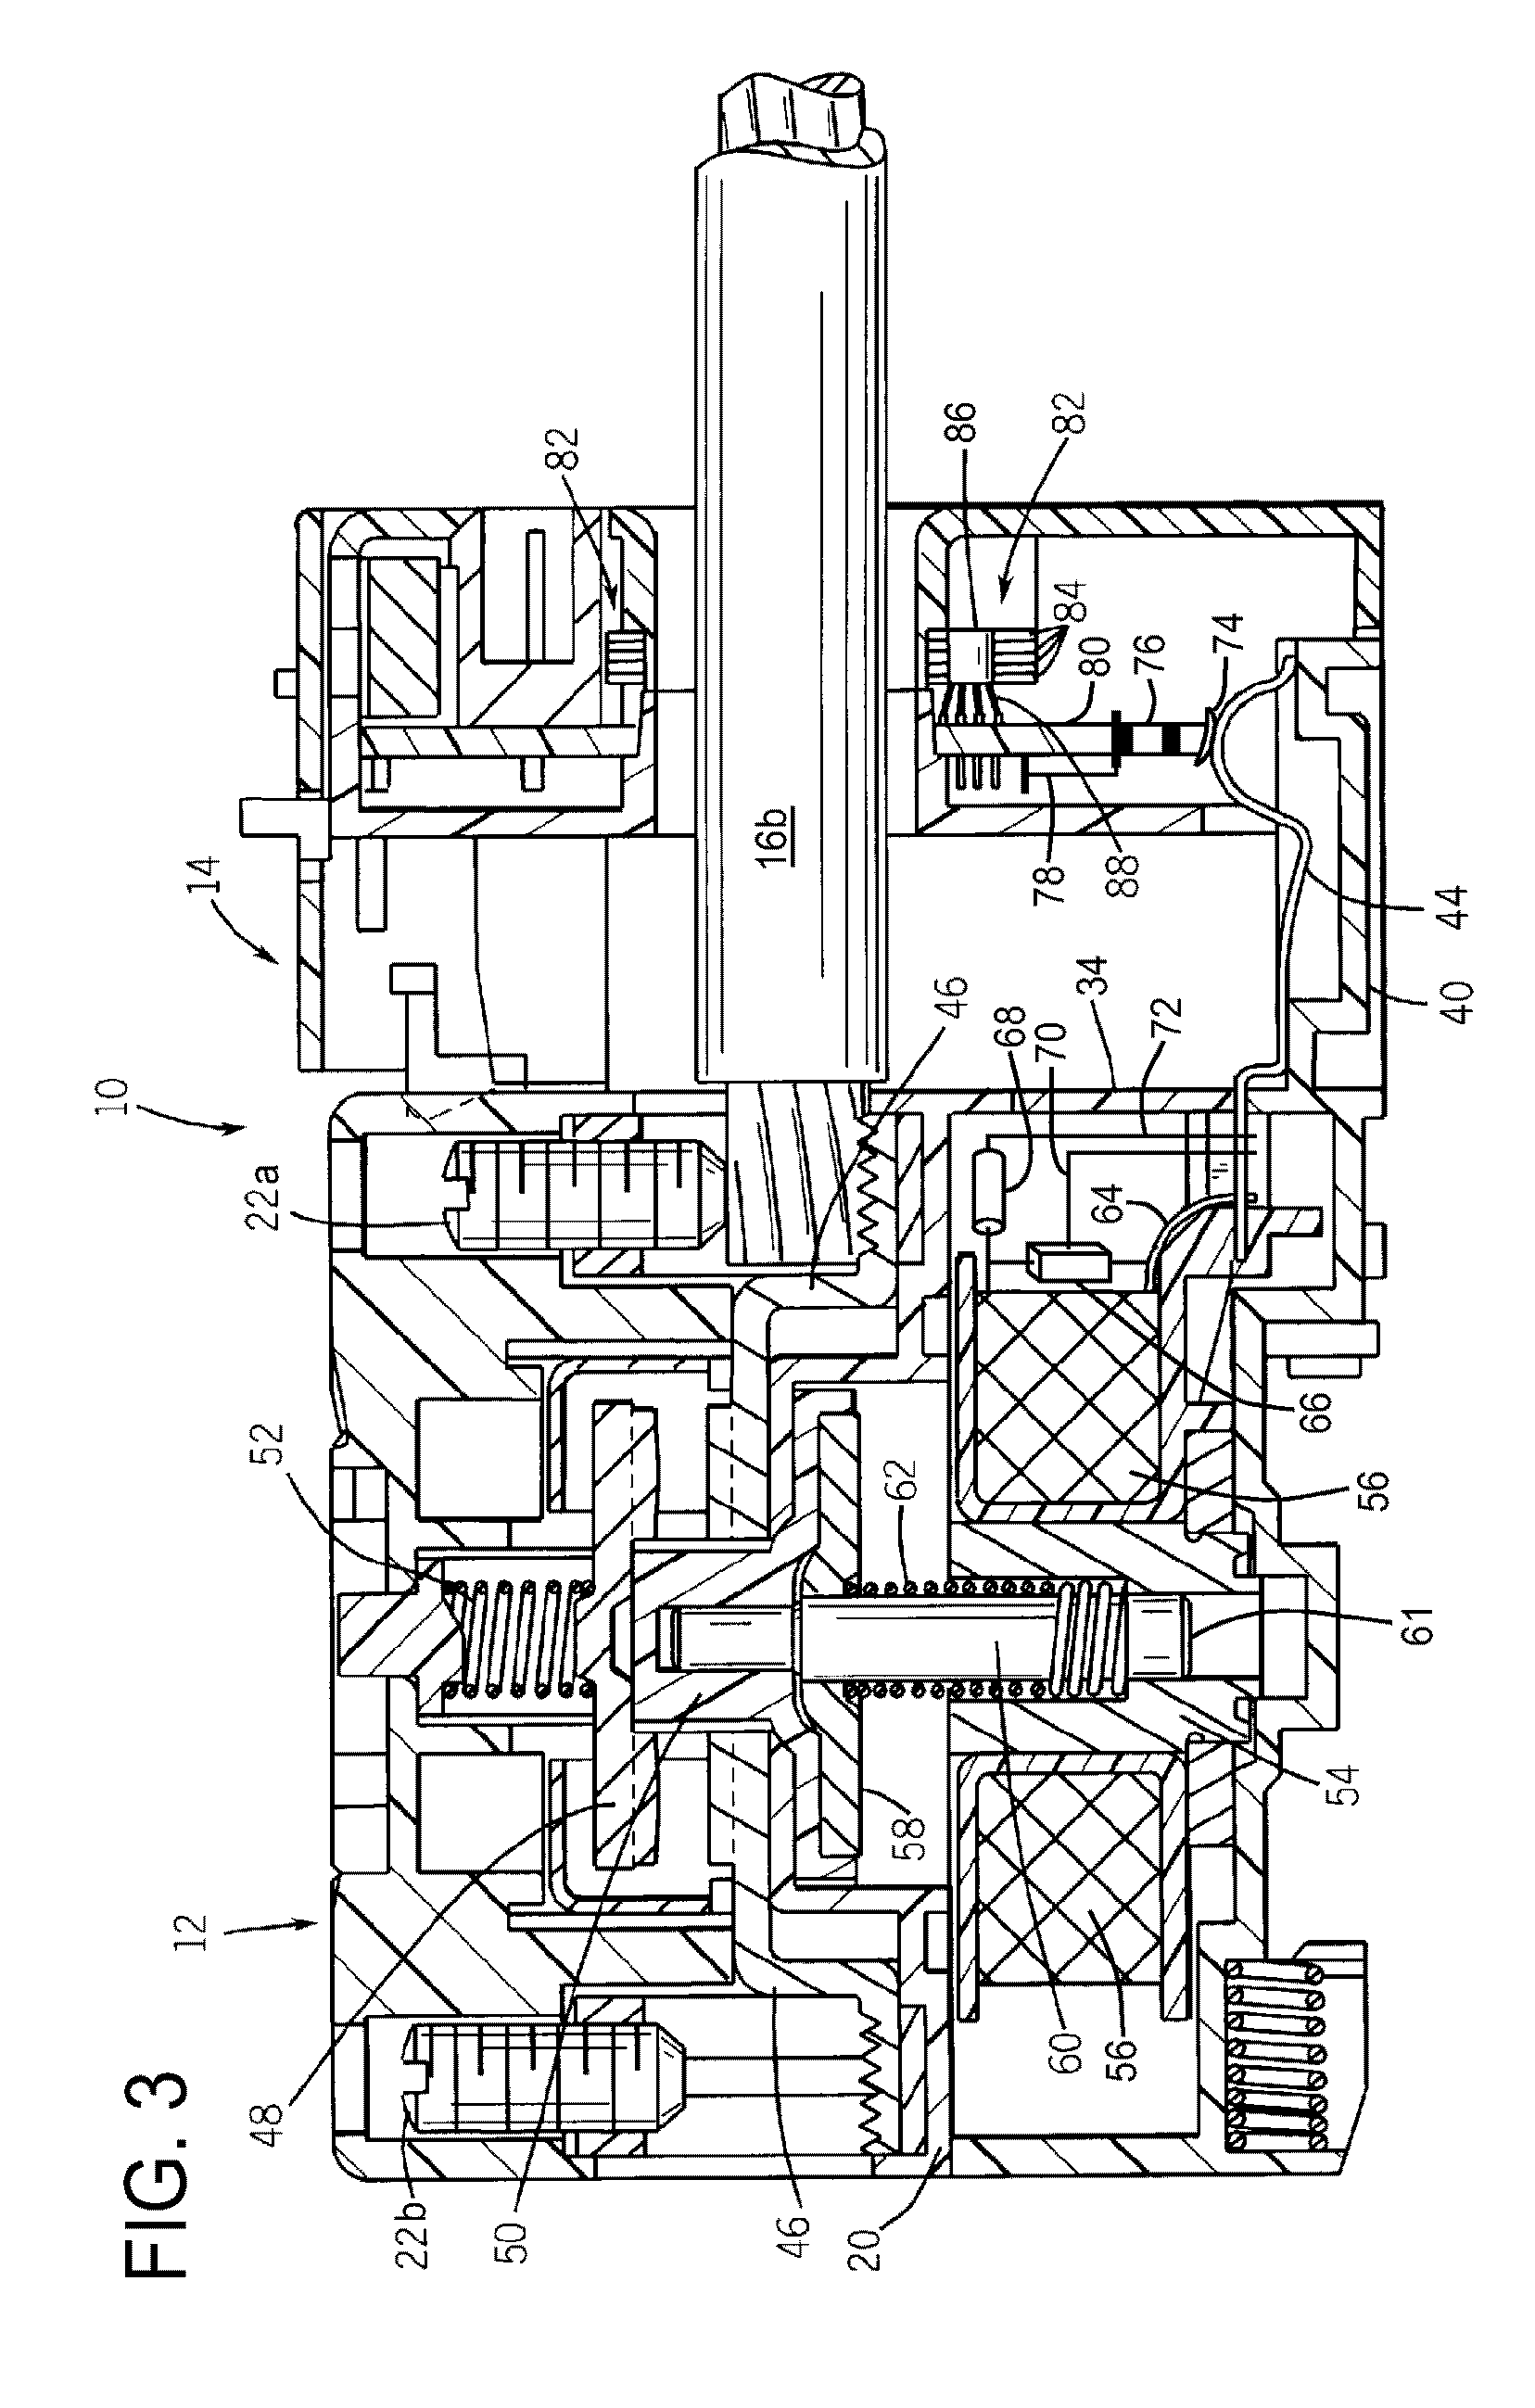 Method and apparatus for monitoring wellness of contactors and starters